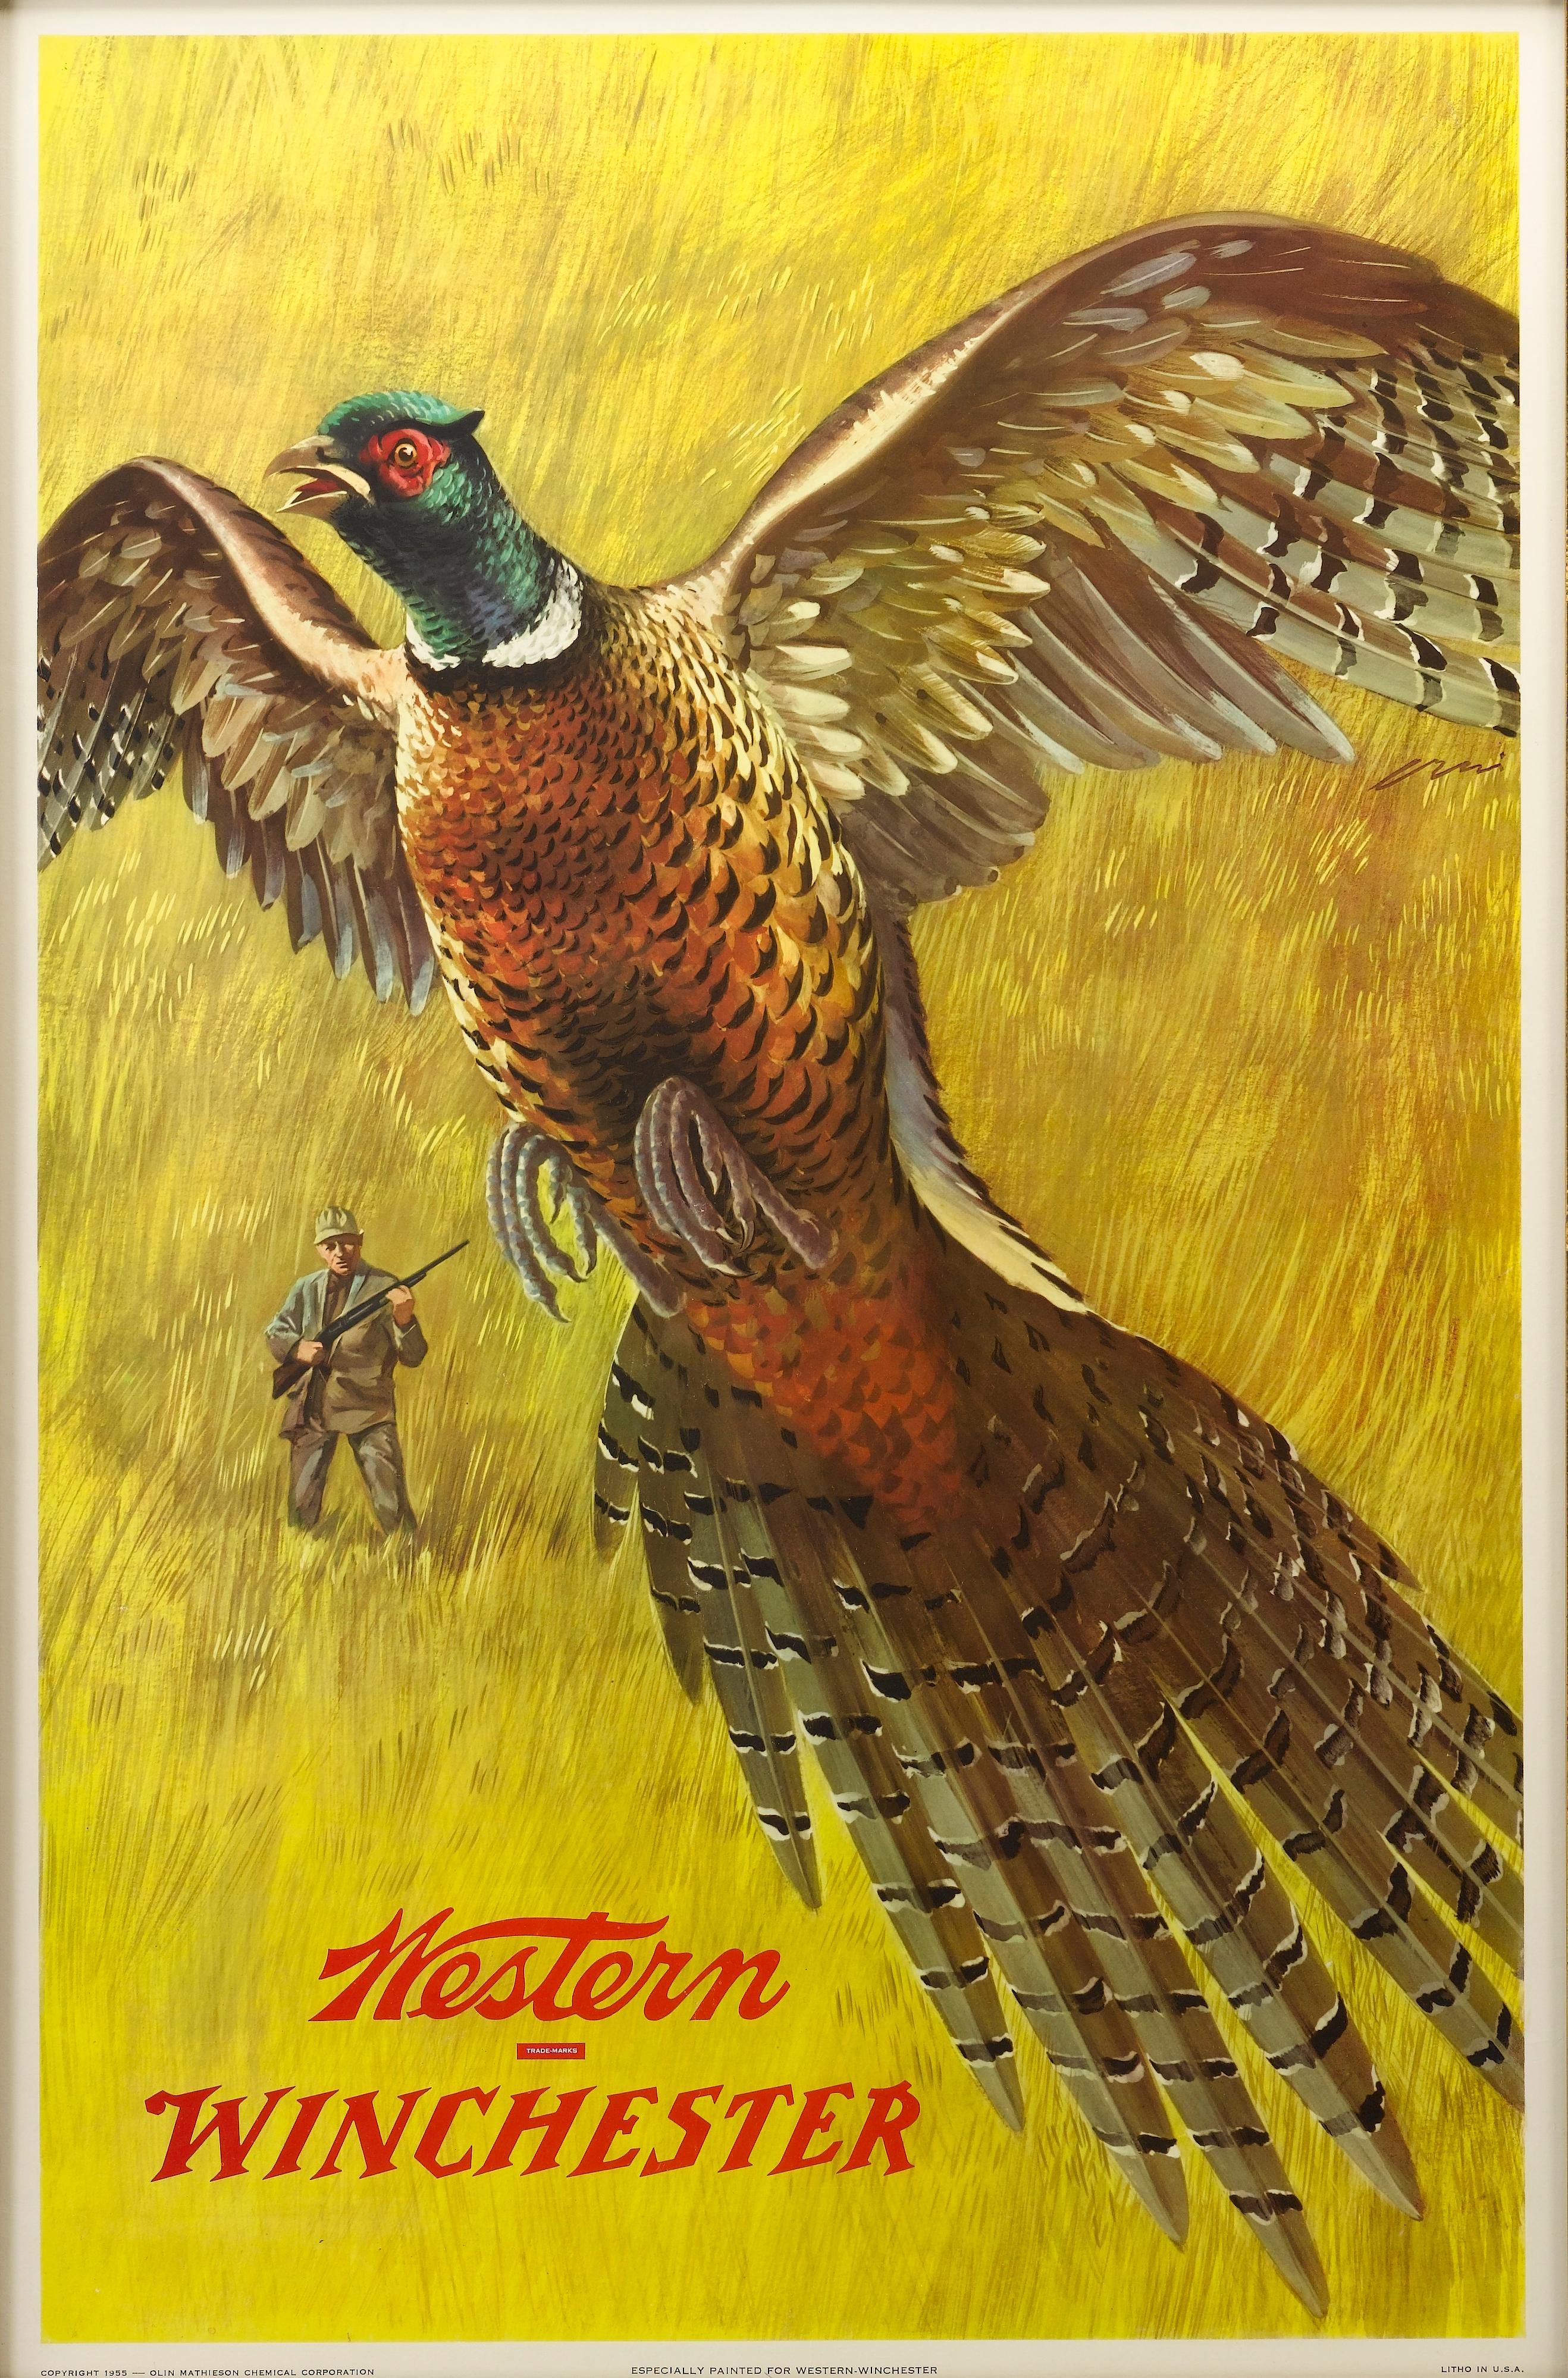 This vintage poster was made to advertise Winchester rifles by displaying game in its natural habitat, in this case a pheasant. The poster has a dramatic flying spread-wing pheasant in the foreground, with a lone hunter in the background. Both the